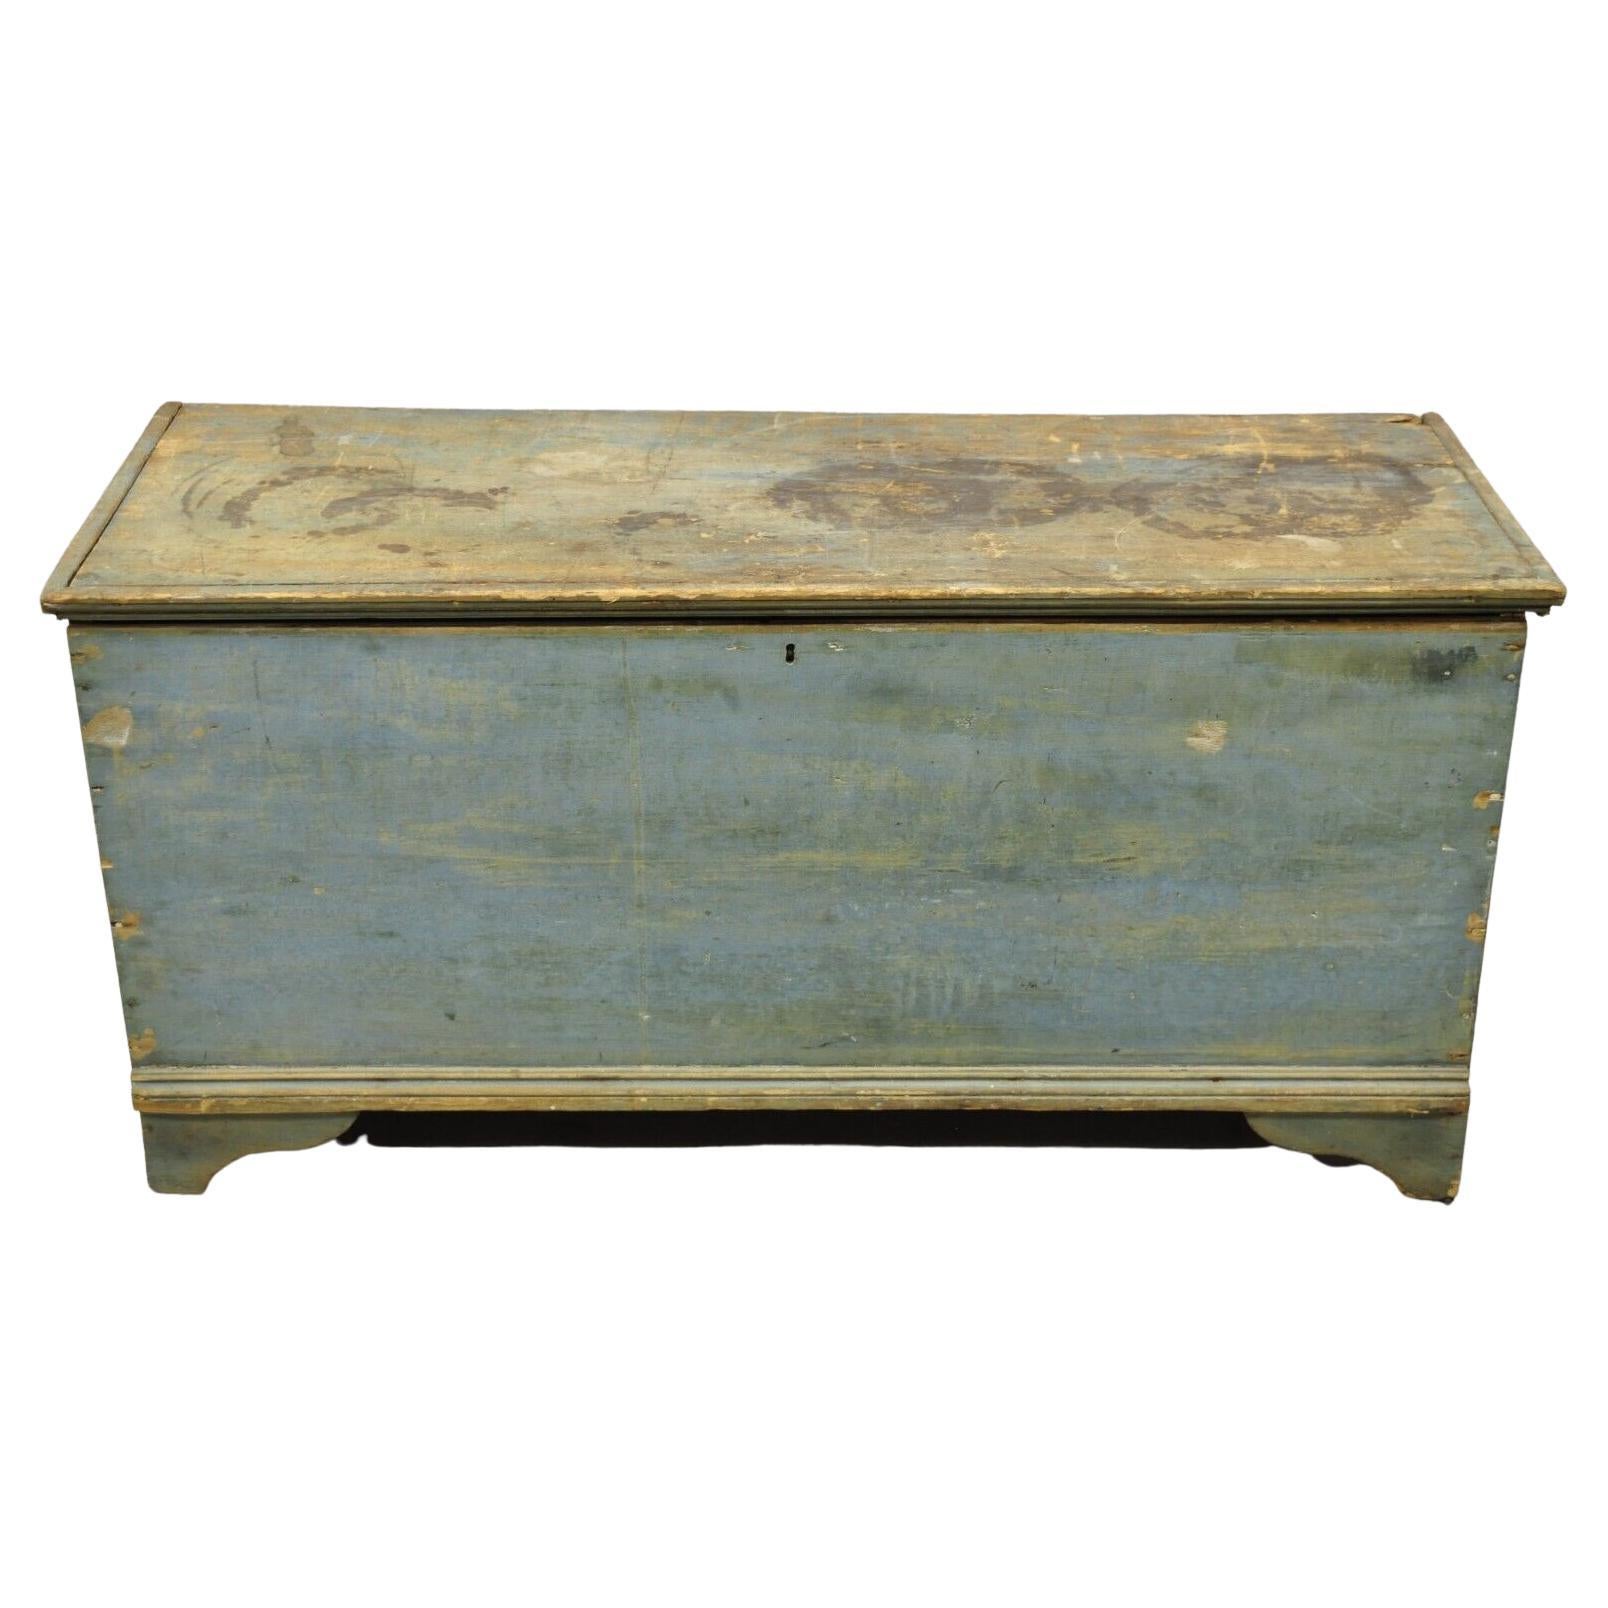 Antique 19th C Blue Green American Country Colonial Painted Blanket Chest Trunk